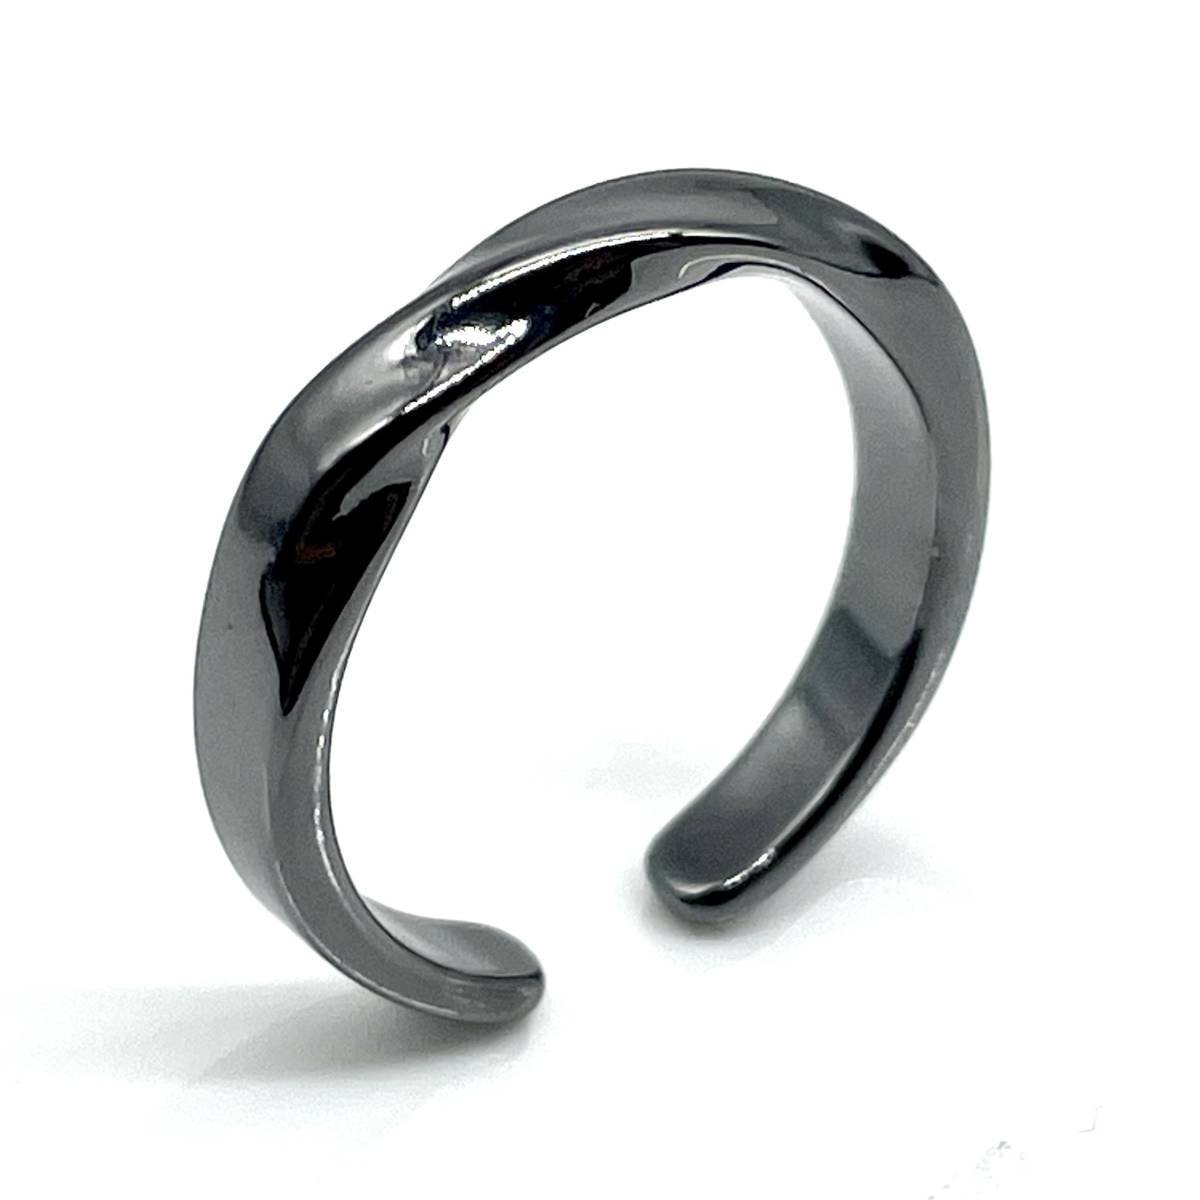  twist design silver ring * ring men's silver 925 16 number ring new goods unused open ring simple casual [PN327-1]